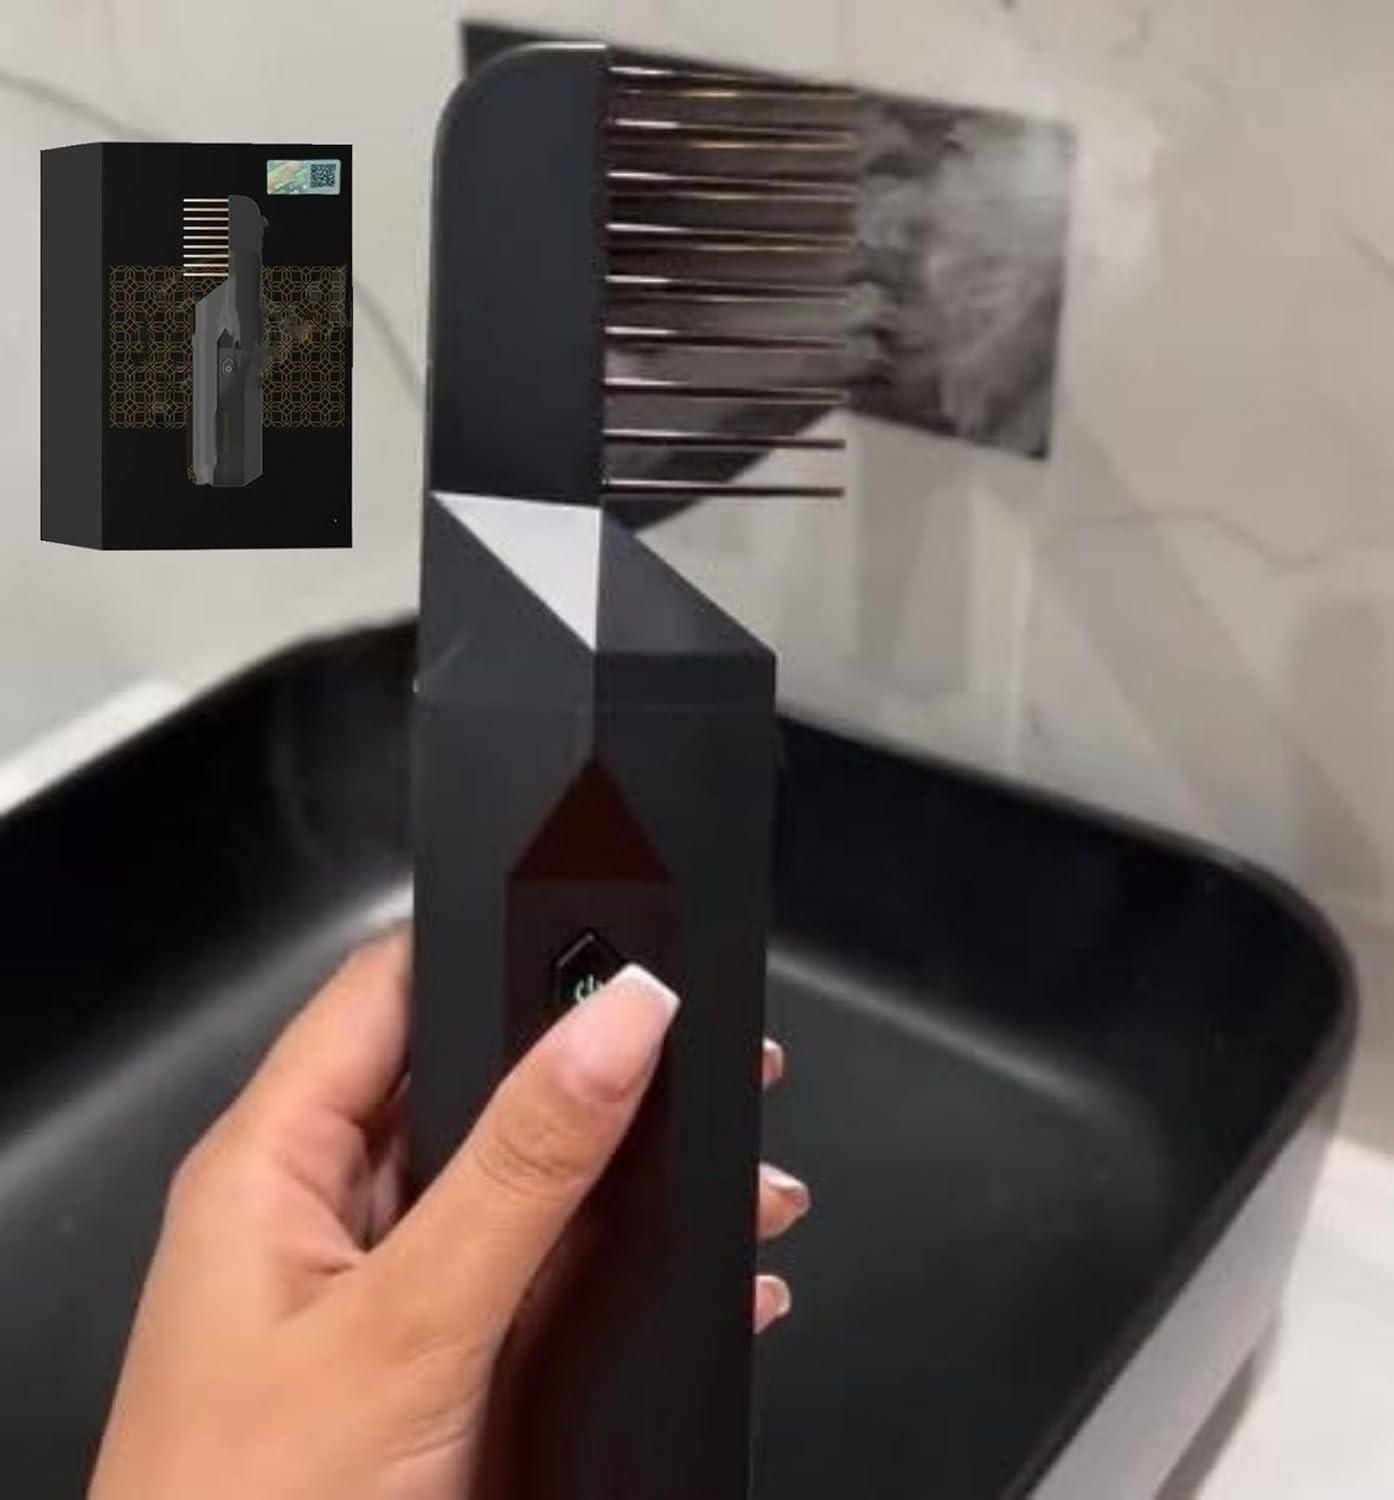 Portable Multifunctional Comb, Adding Fragrance to Hair Hand Massage and Comb Hair